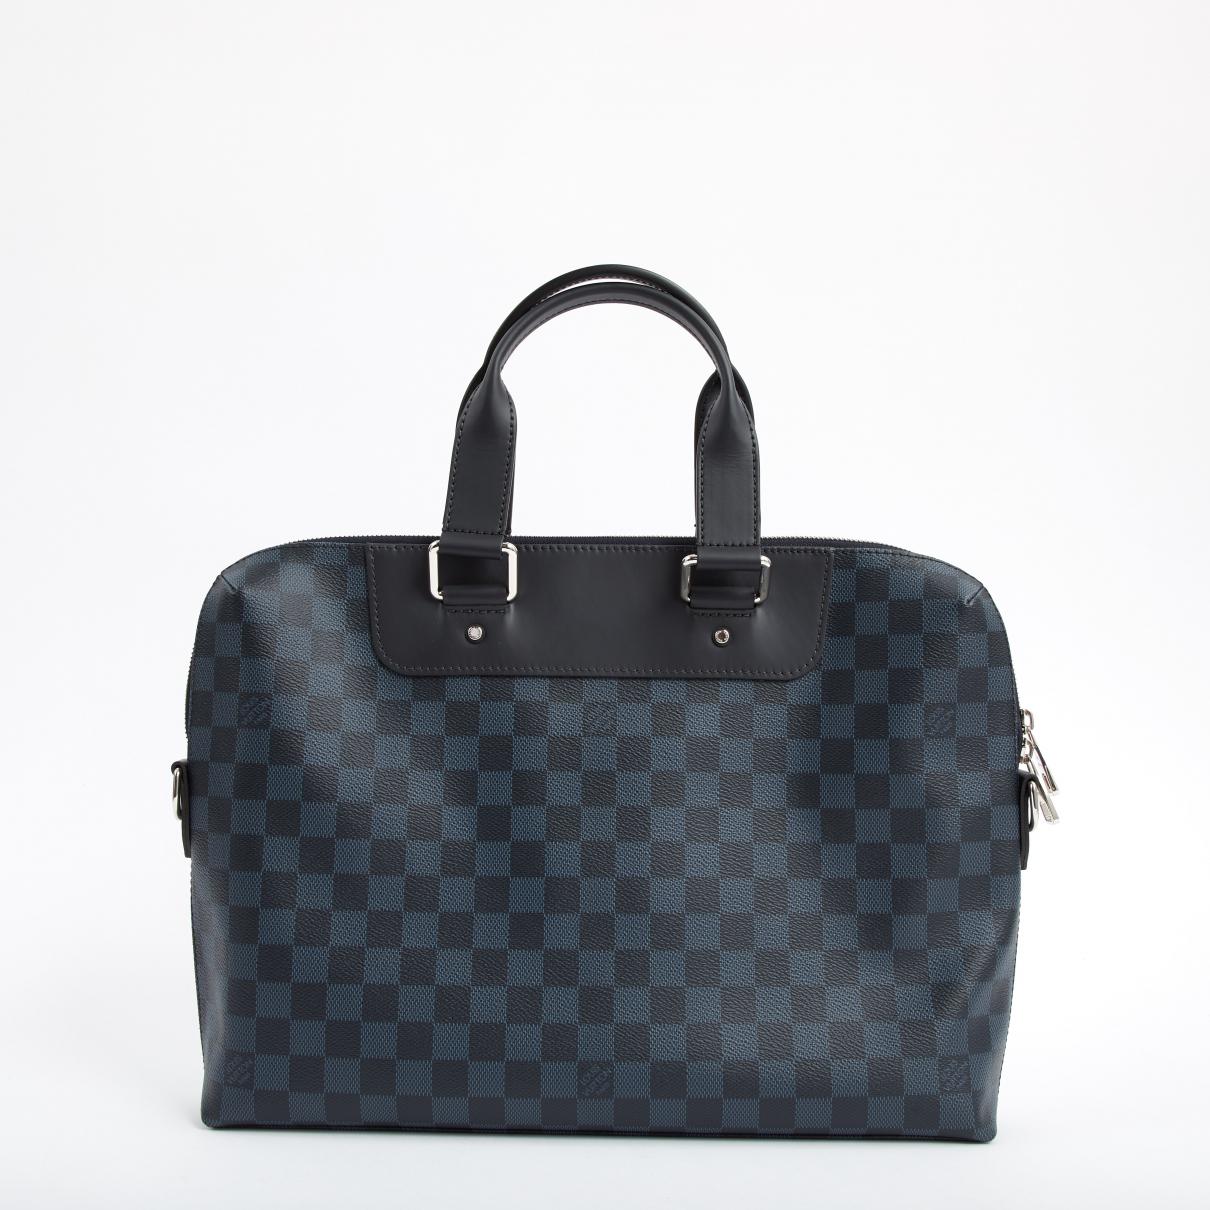 Louis Vuitton Grey Leather Bag in Gray for Men - Lyst